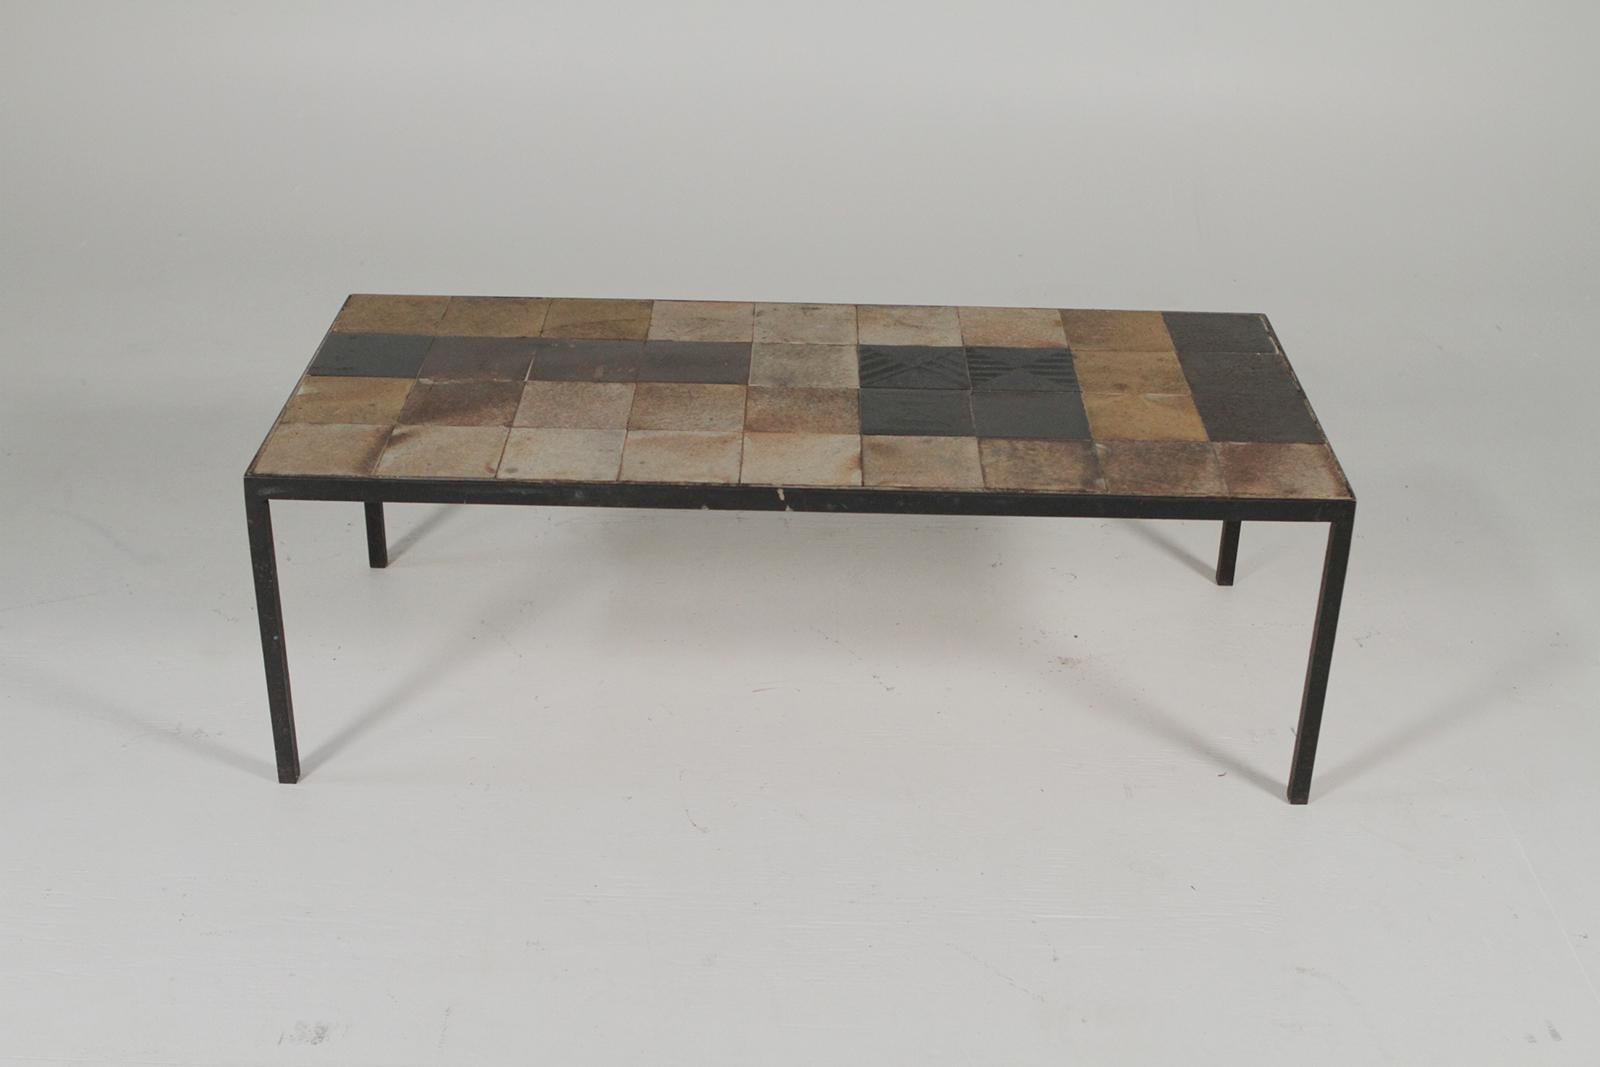 Midcentury French iron and tile top cocktail/ coffee table
 Dimensions 36”W X 16” D X 12” H.